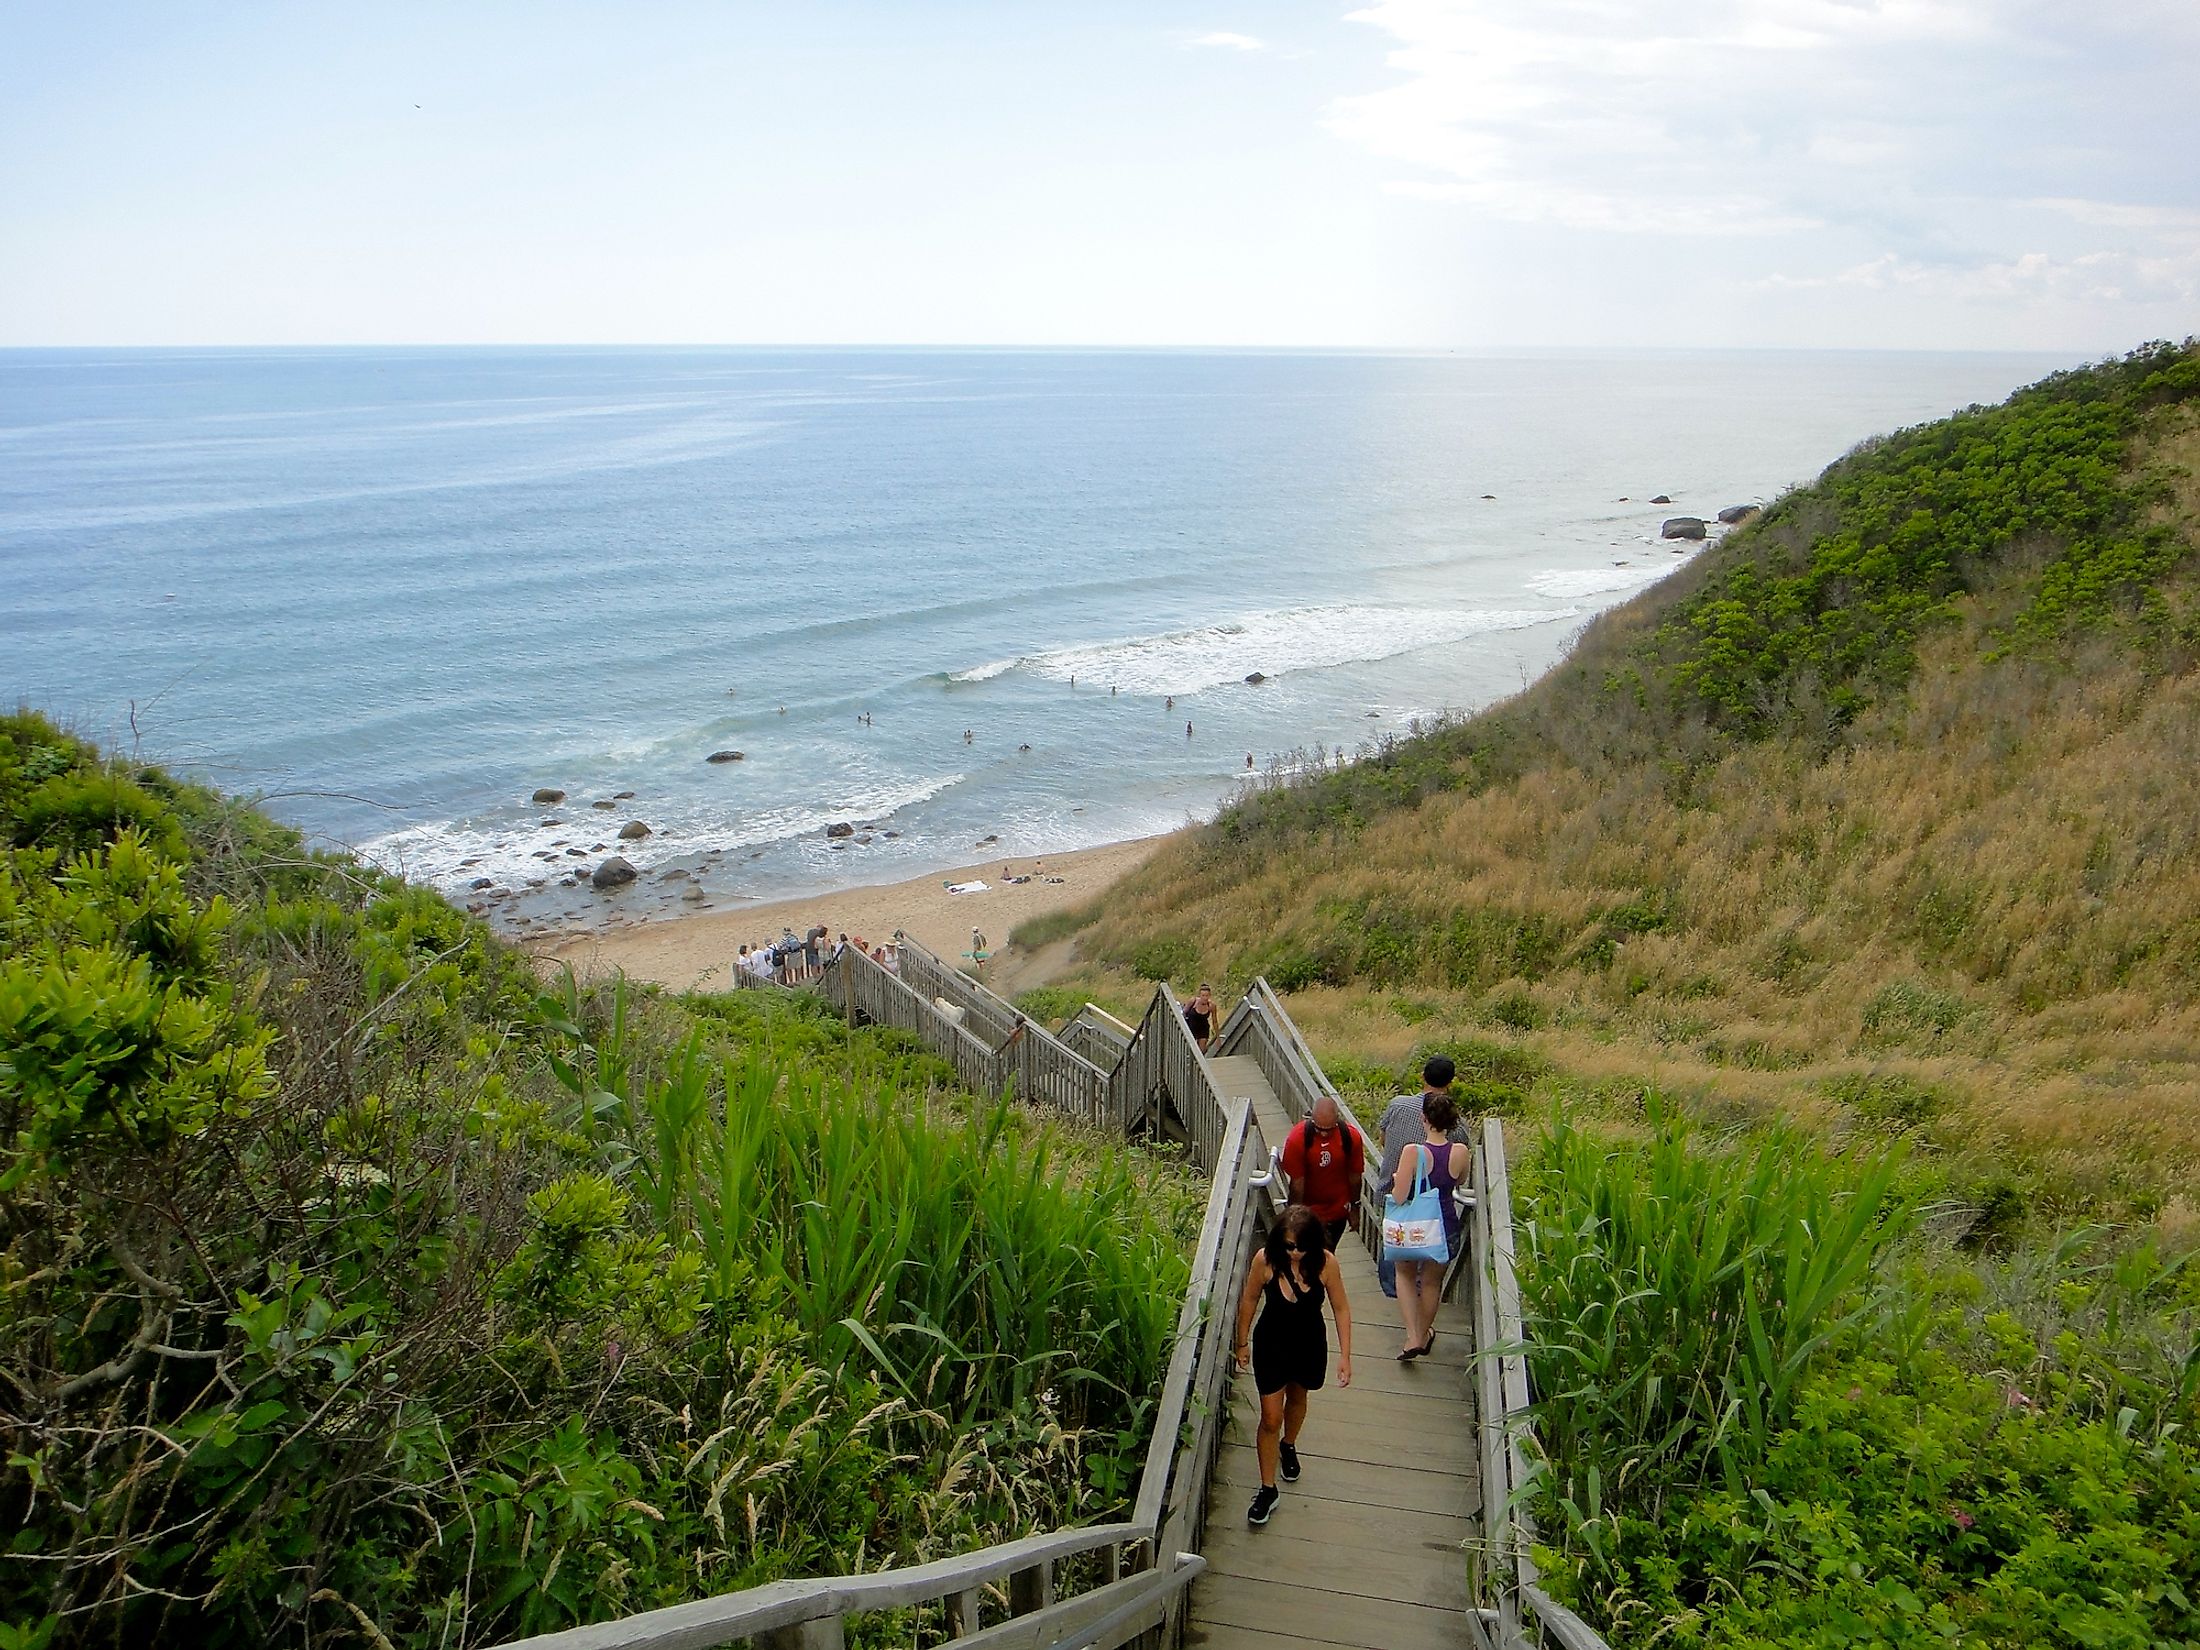 The stairs leading to the Mohegan Bluffs and beach on Block Island. Editorial credit: quiggyt4 / Shutterstock.com